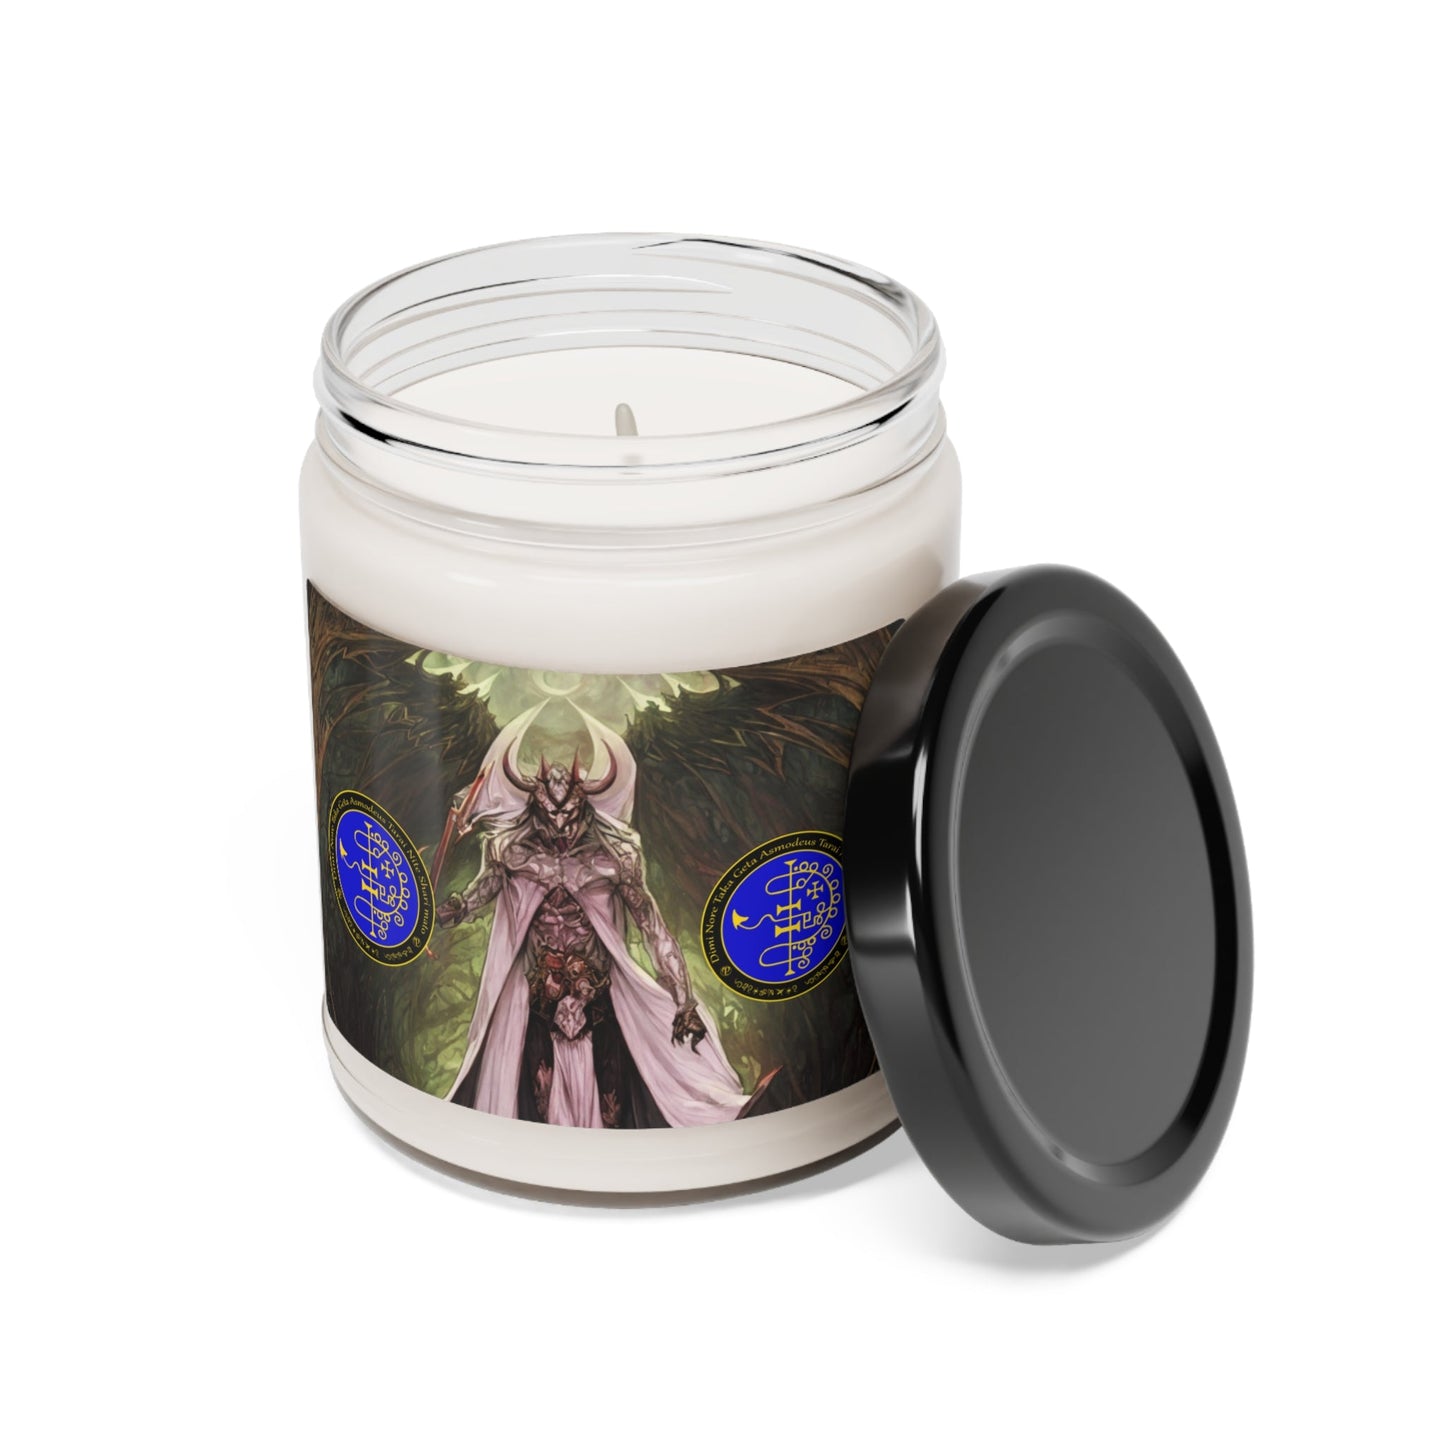 Demon-Asmodeus-oltar-Soy-Scented-Soy Candle-for-Gamble-related-offerings-rituals-inicijations-or-praying-and-meditation-22